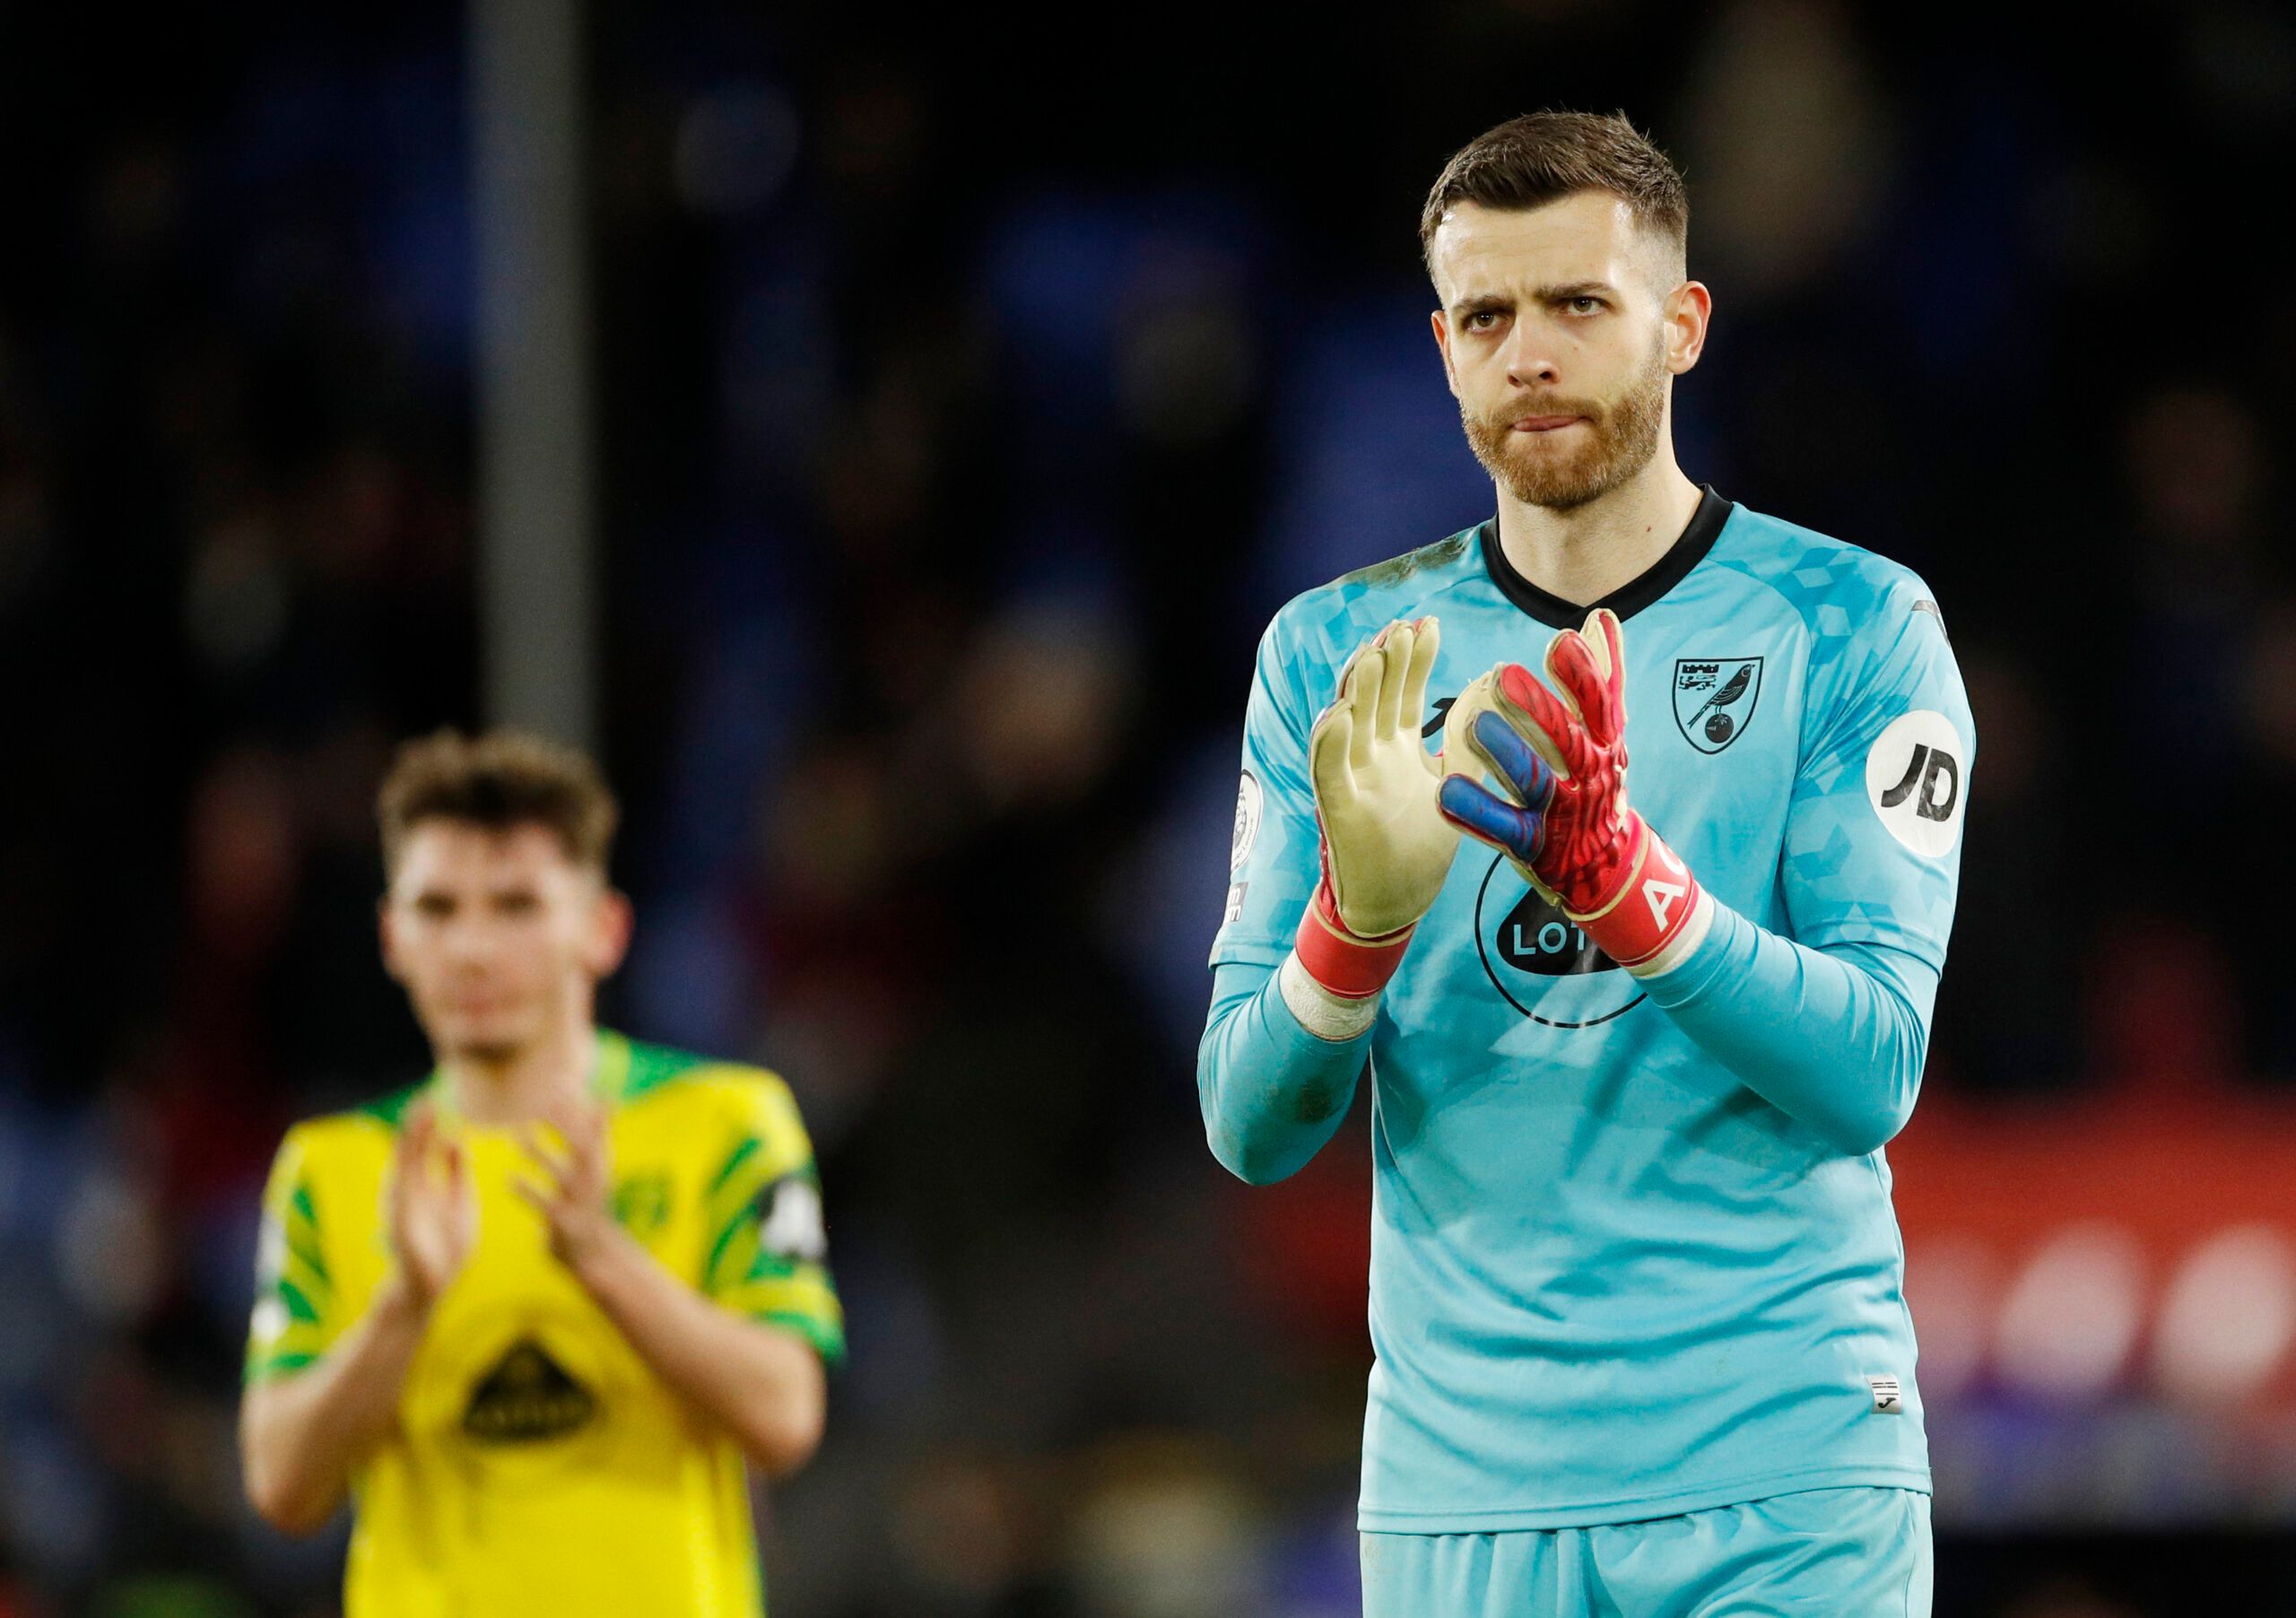 Soccer Football - Premier League - Crystal Palace v Norwich City - Selhurst Park, London, Britain - December 28, 2021 Norwich City's Angus Gunn applauds the fans after the match Action Images via Reuters/Andrew Boyers EDITORIAL USE ONLY. No use with unauthorized audio, video, data, fixture lists, club/league logos or 'live' services. Online in-match use limited to 75 images, no video emulation. No use in betting, games or single club /league/player publications.  Please contact your account repr